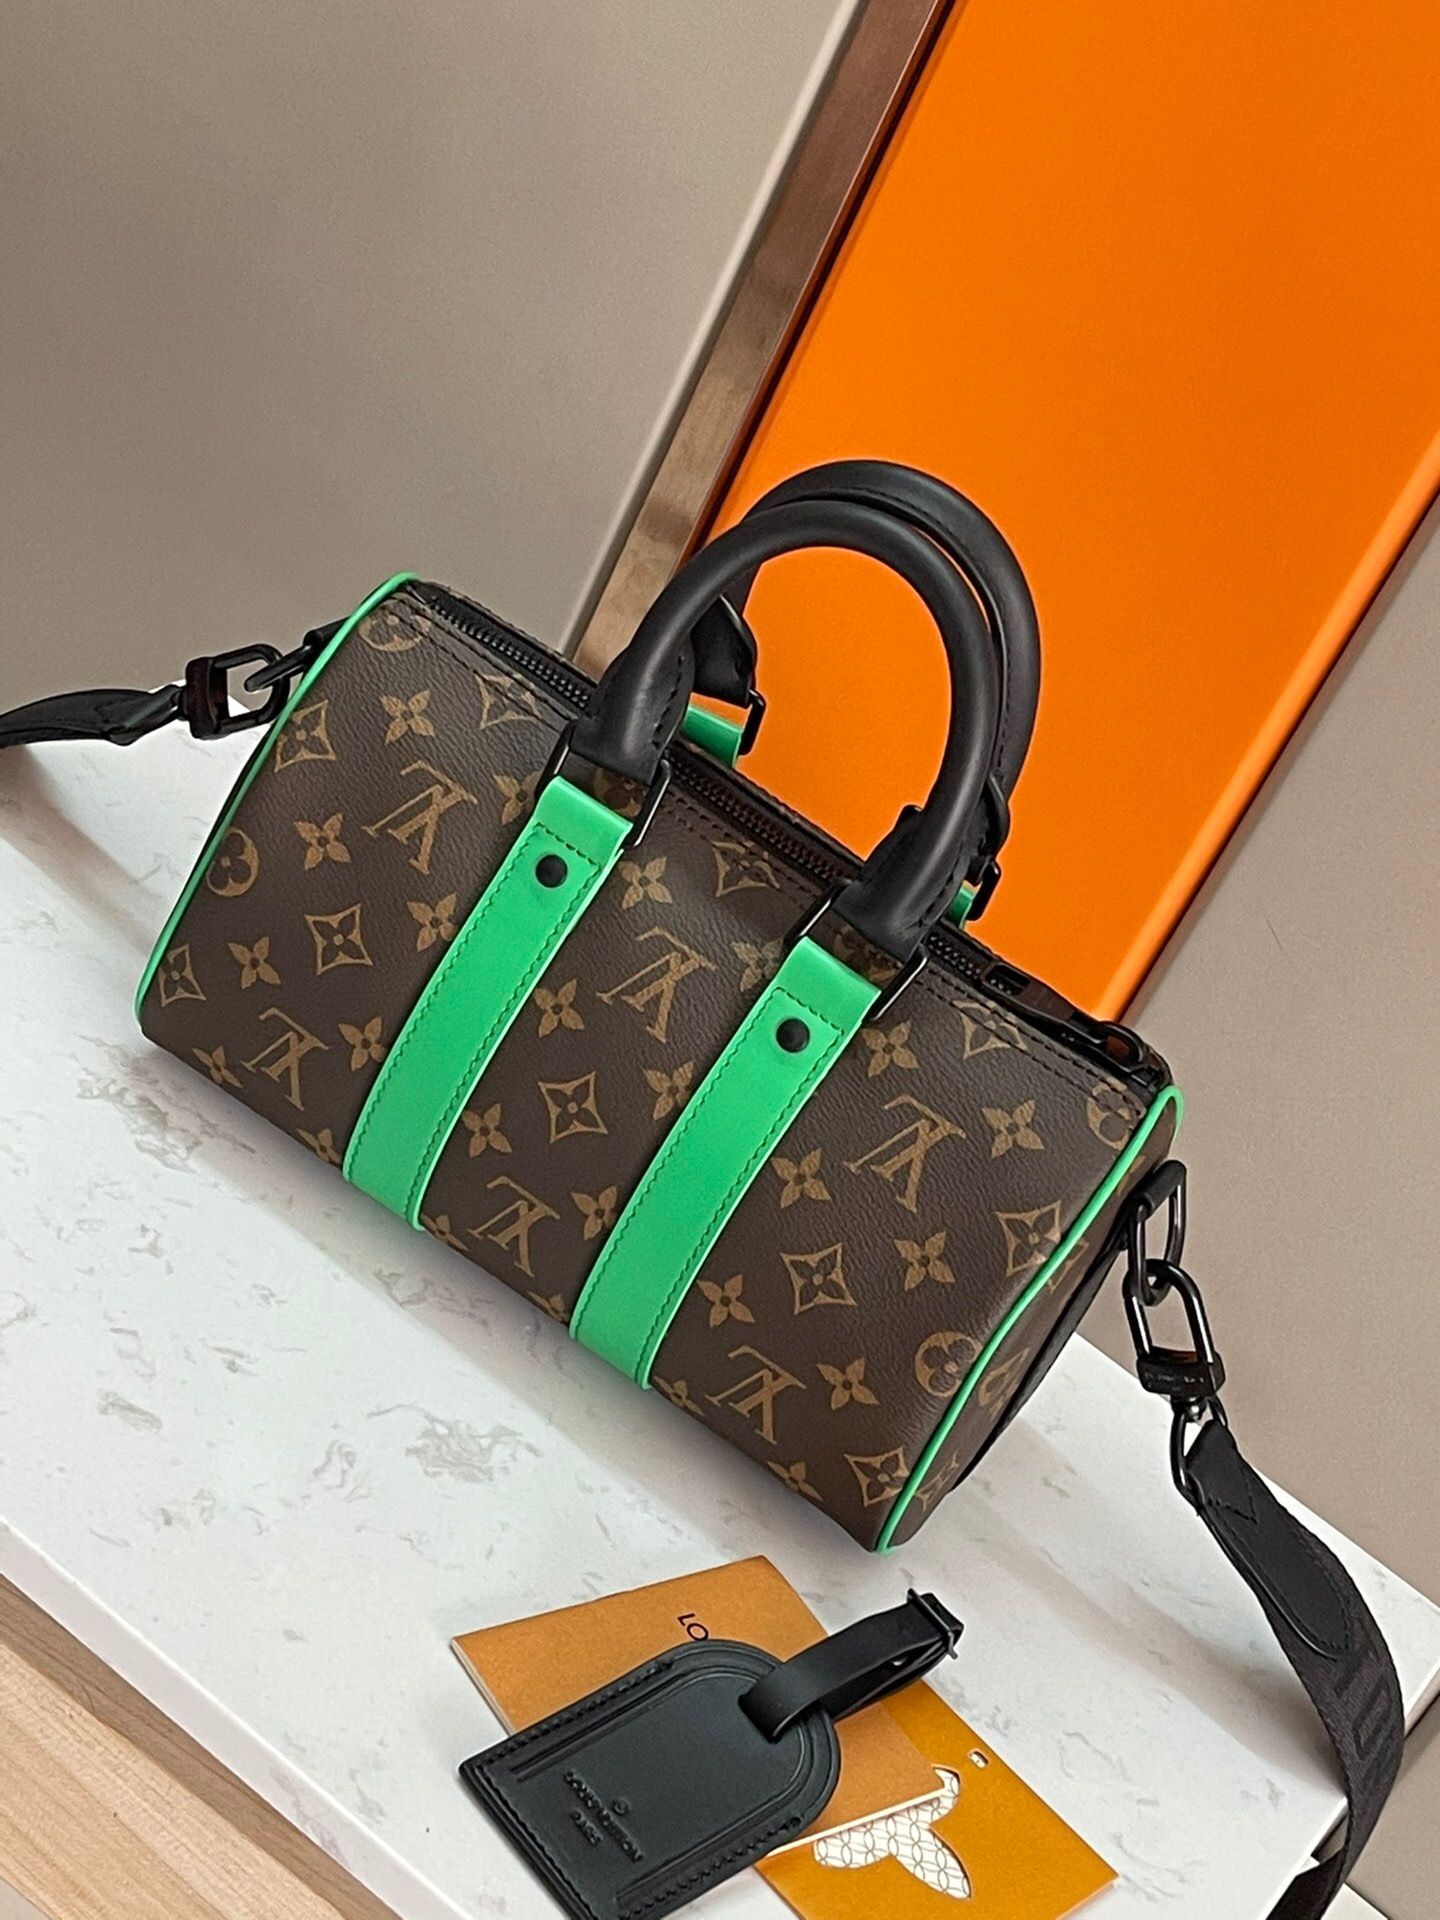 Replica Louis Vuitton TREKKING BACKPACK LV M43680 for Sale